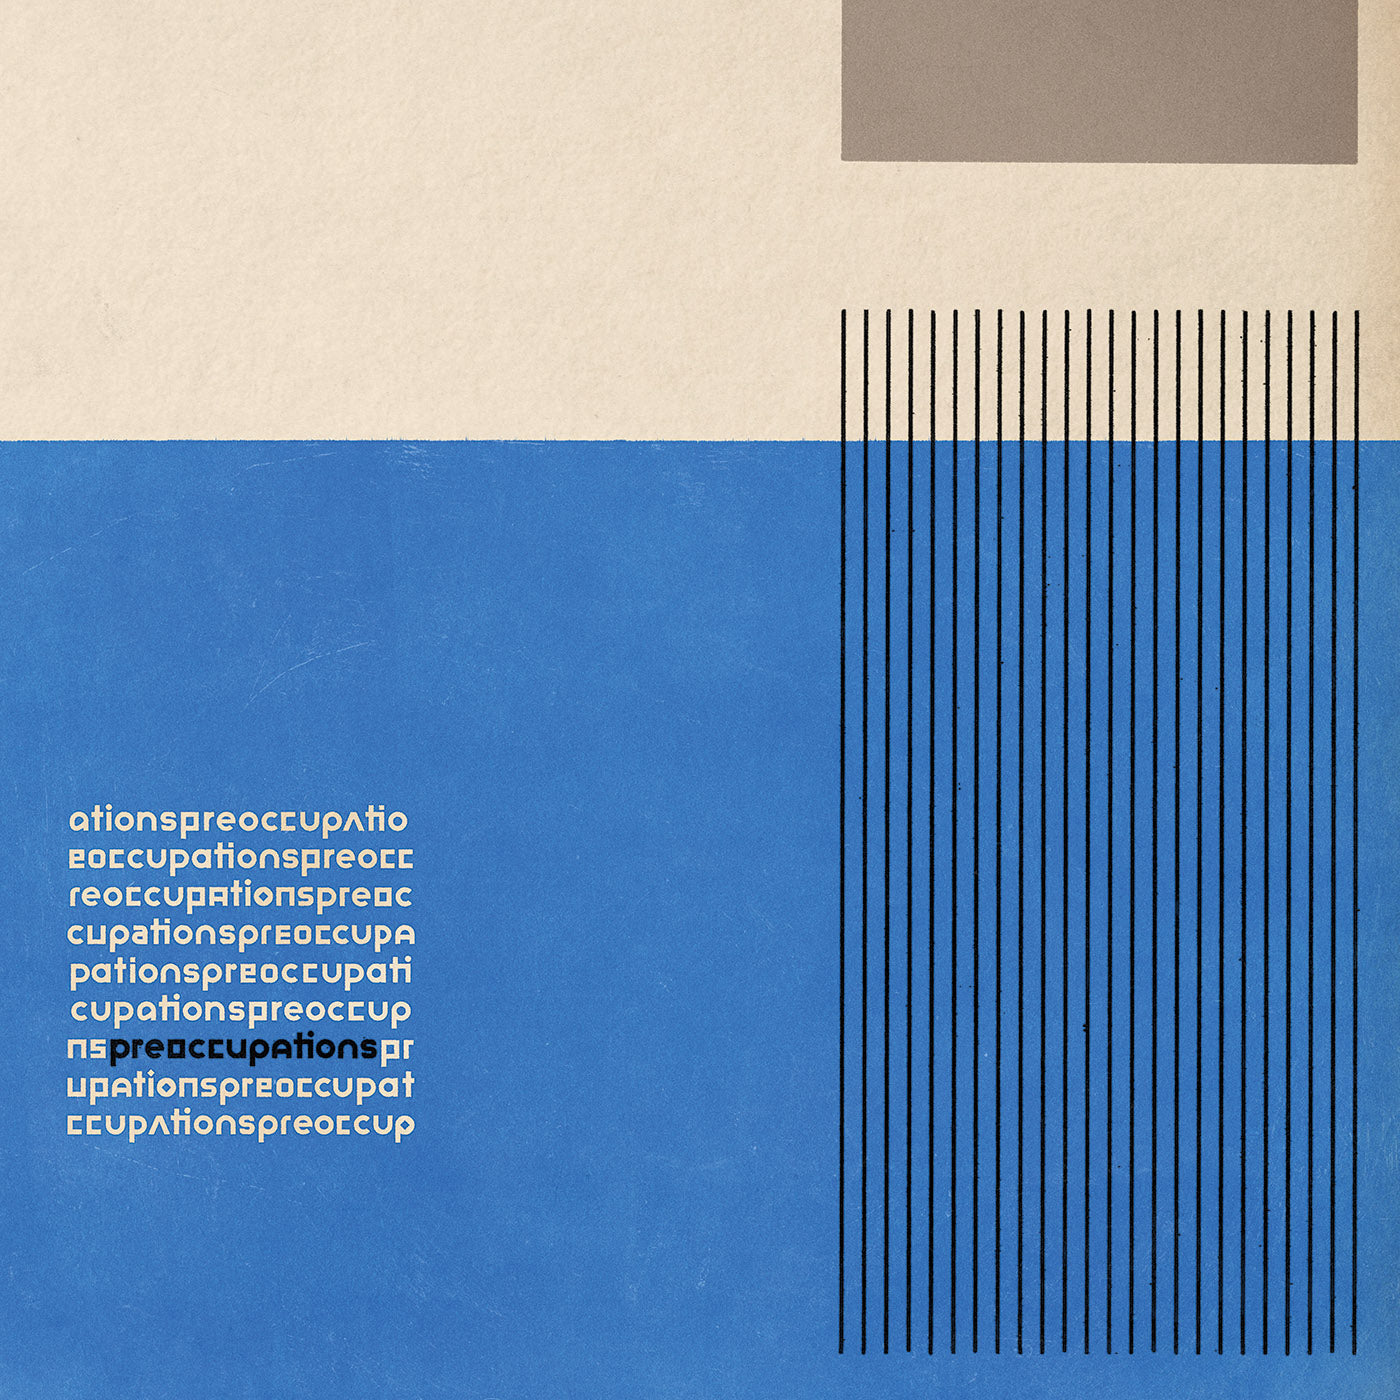 [DAMAGED] Preoccupations - Preoccupations